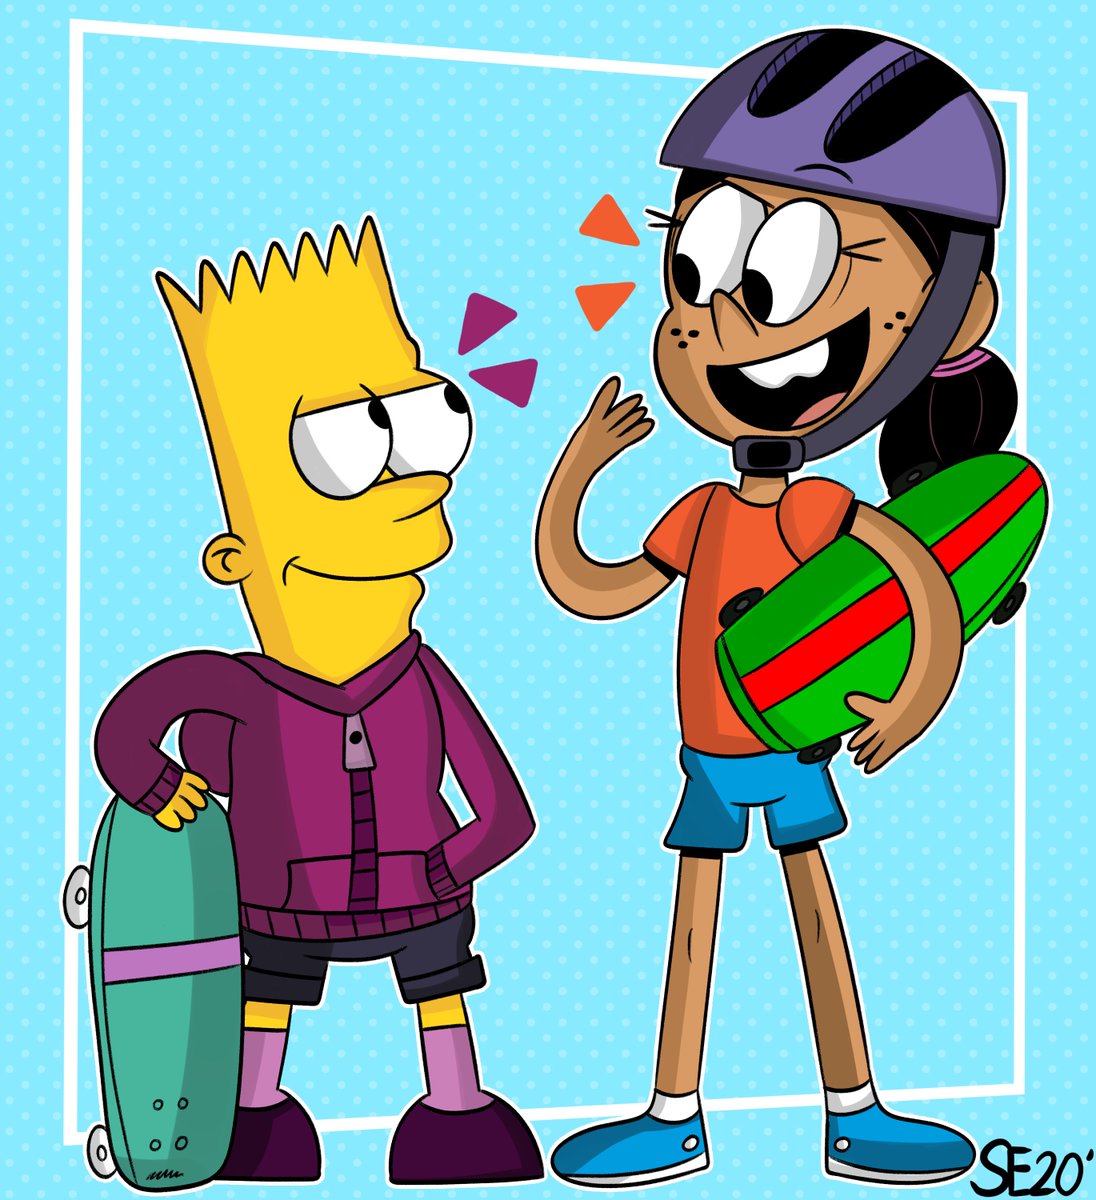 My two favorite fictional skateboarders🛹💞 #TheLoudHouse #TheCasagrandes #RonnieAnneSantiago #TheSimpsons #BartSimpson #ClothesSwap